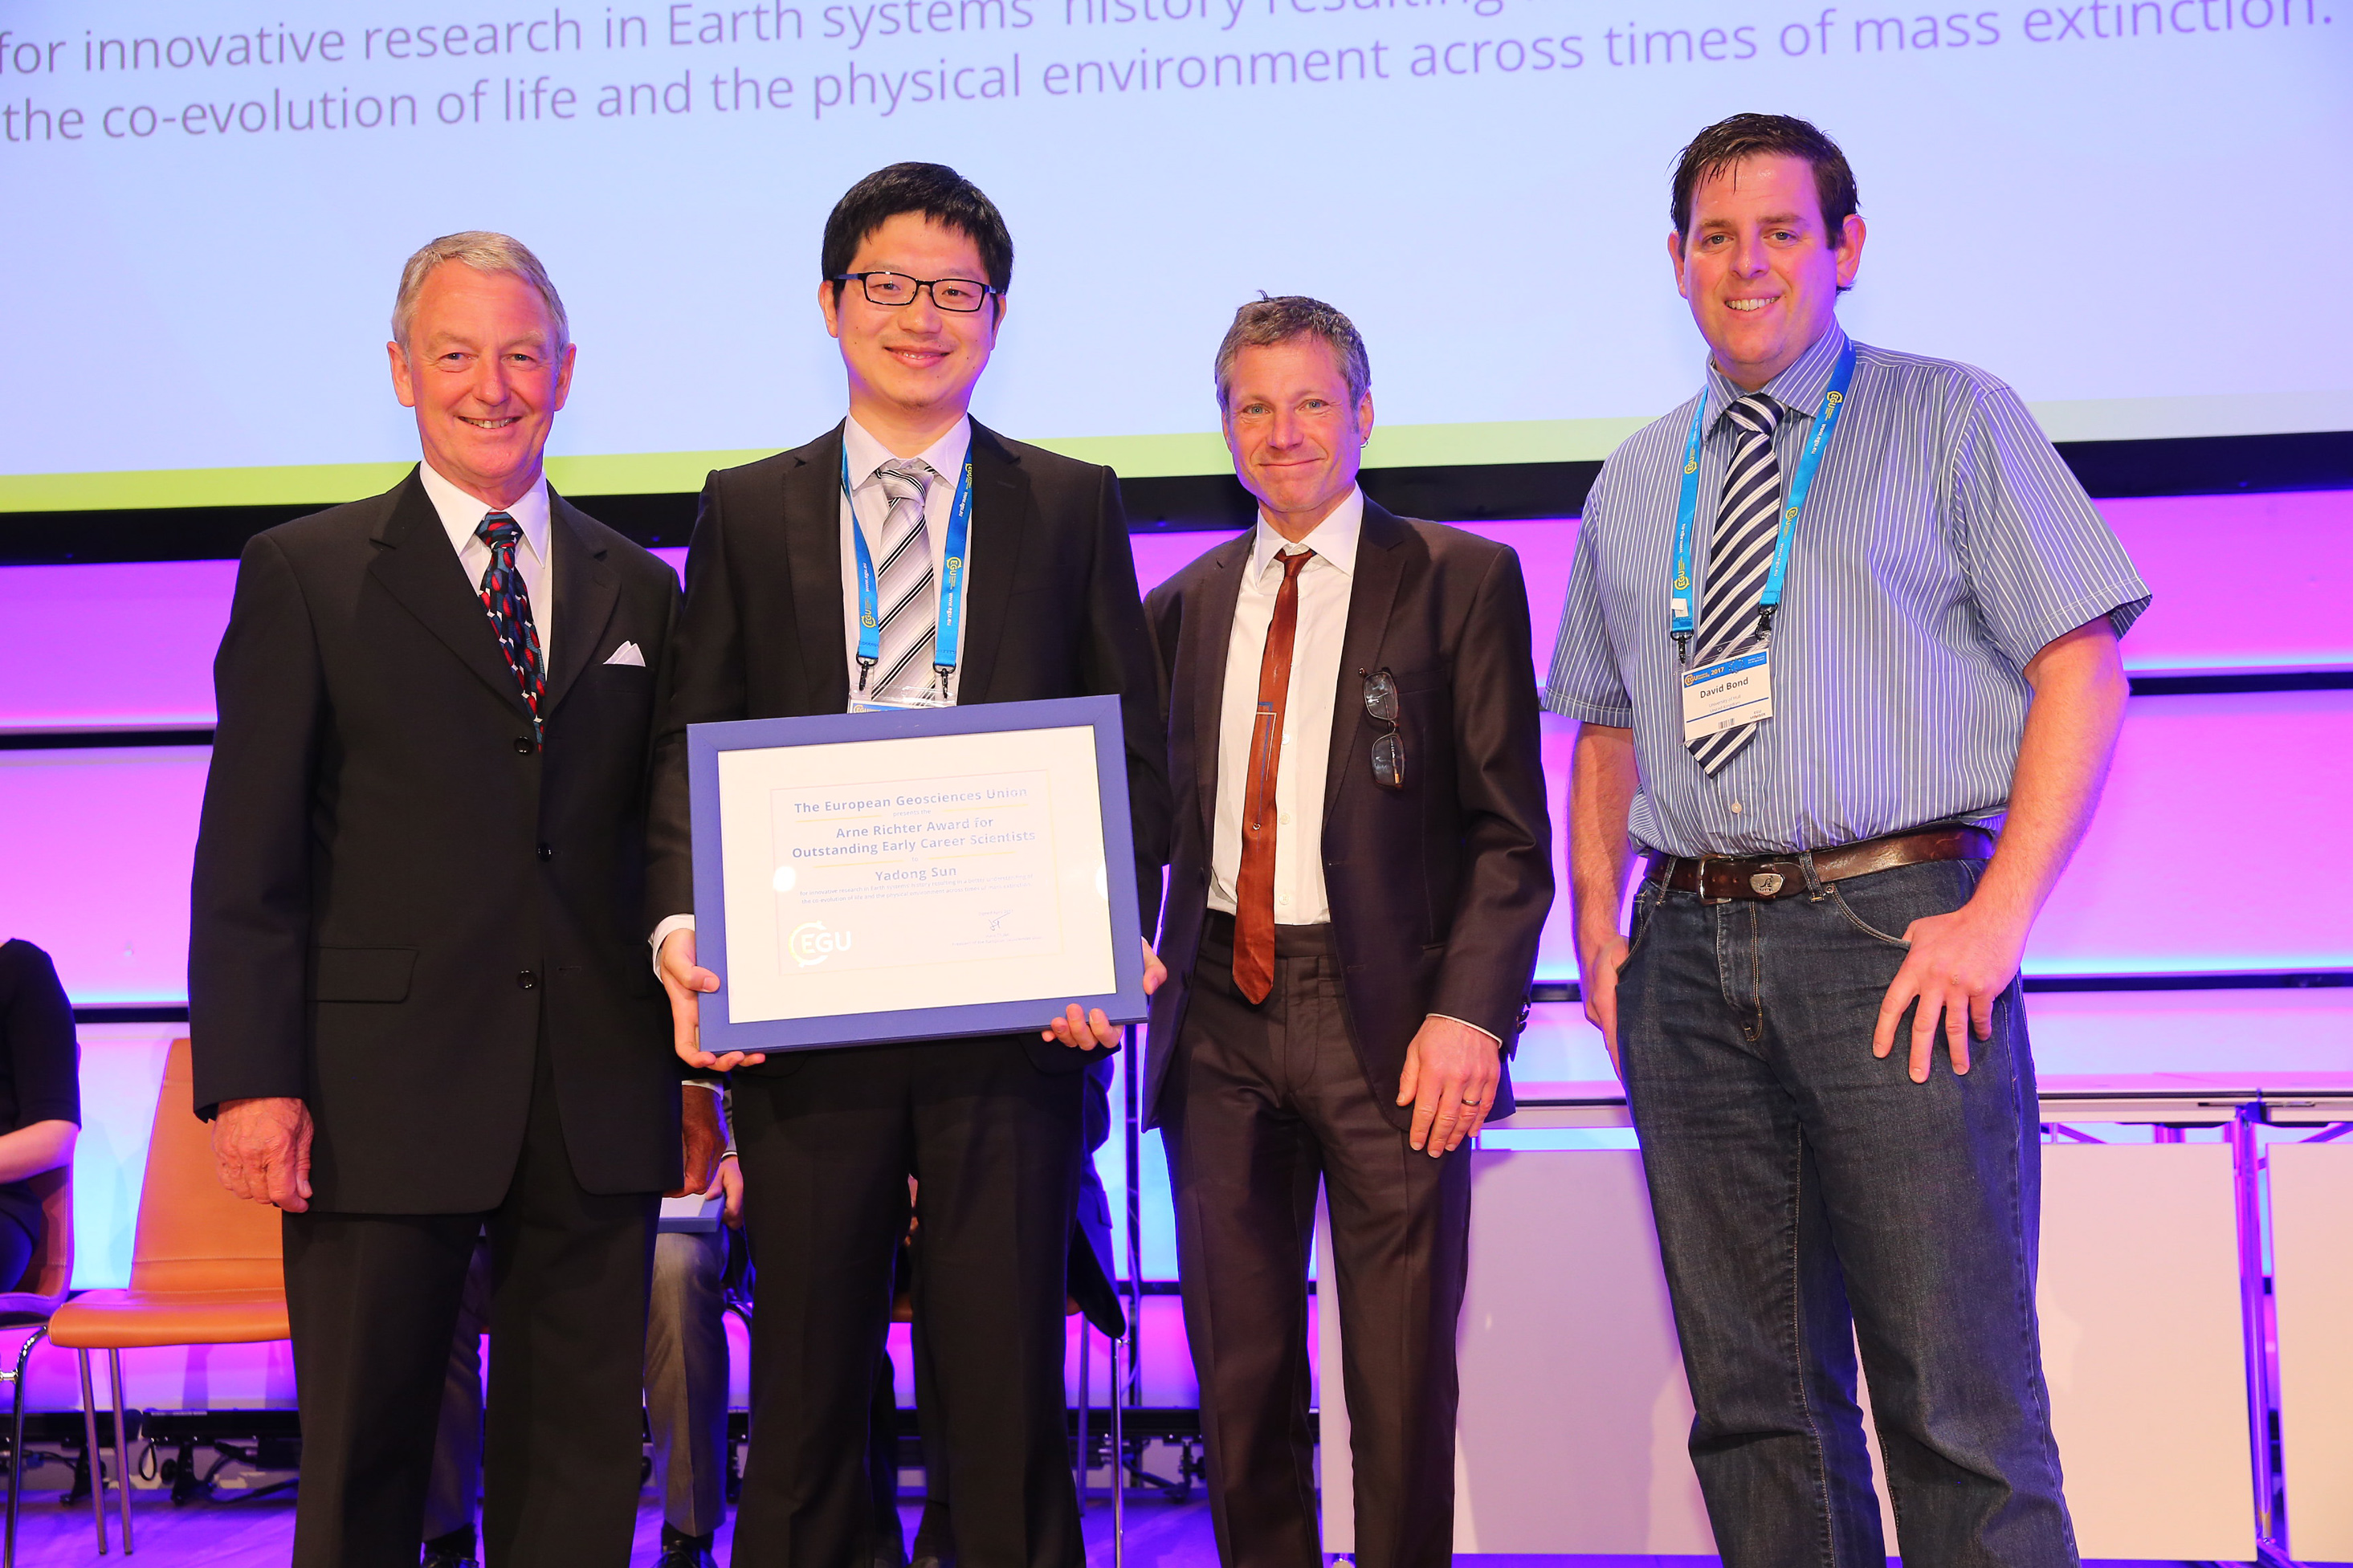 Dr. Yadong Sun was awarded the EGU union level Arne Richter Early Career Scientists award